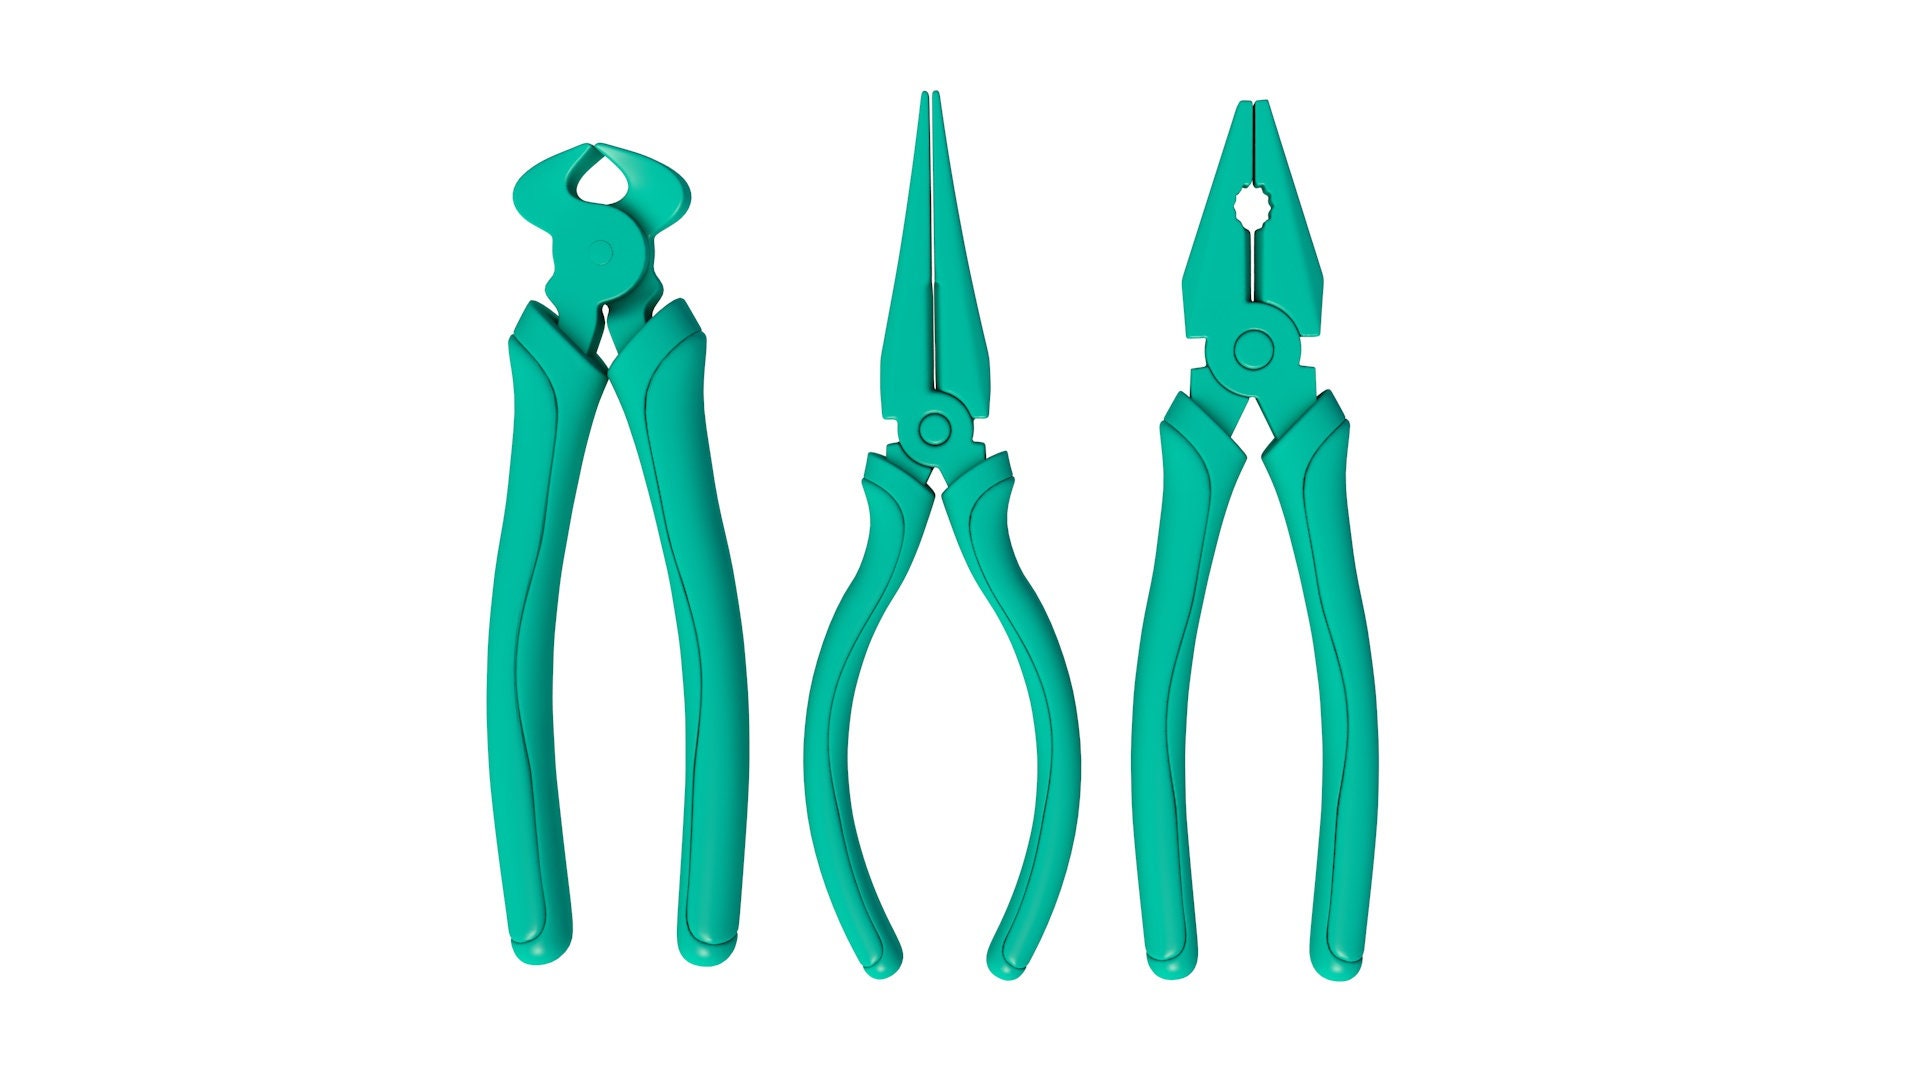 Chain Nose Pliers, Jewelry Making Tools, Ergonomic Grip Handles